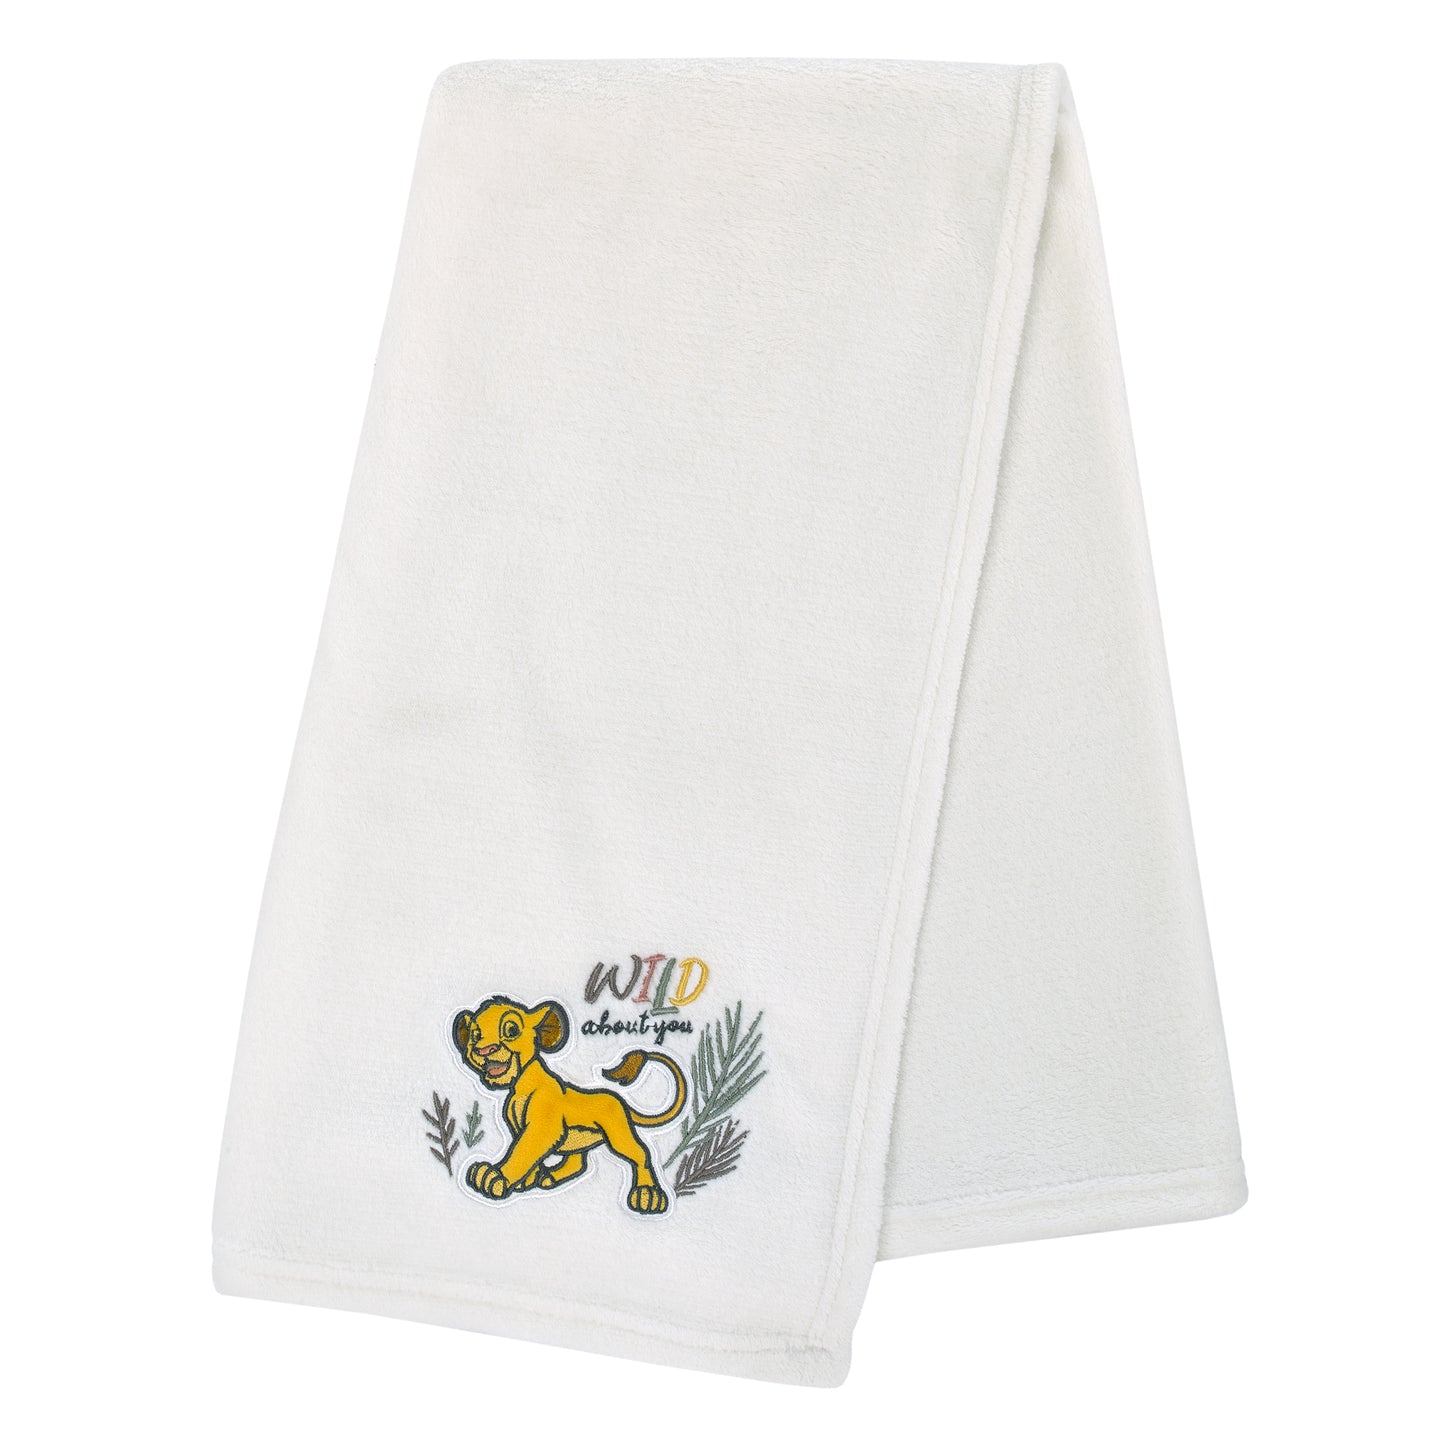 Disney Lion King - Wild About You Ivory Simba Super Soft Baby Blanket with Applique